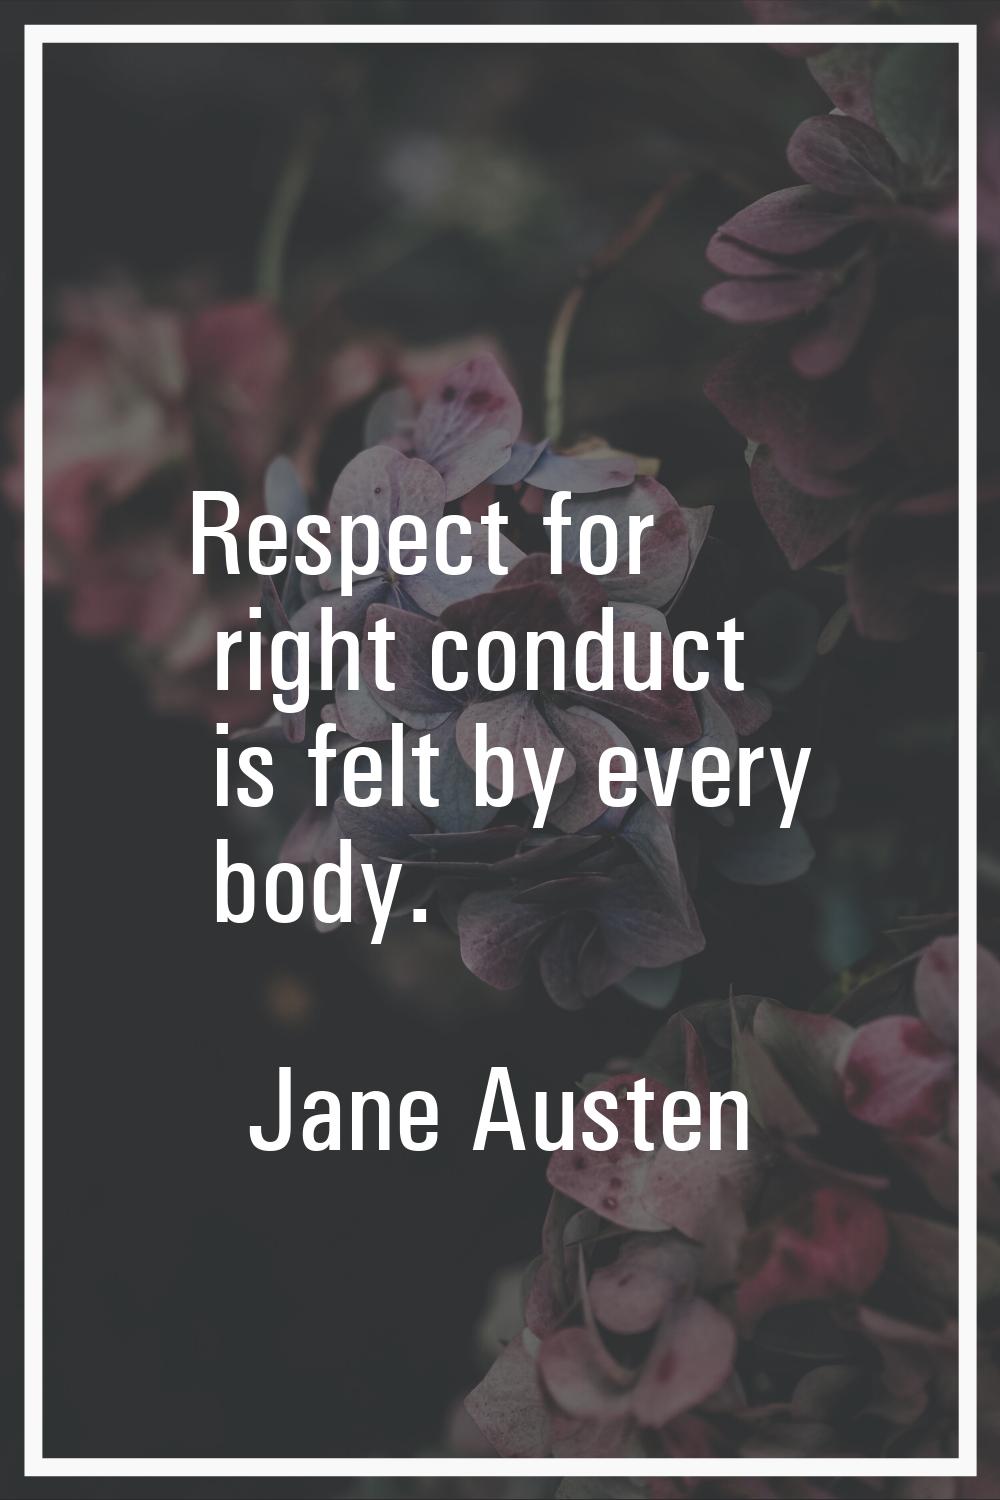 Respect for right conduct is felt by every body.